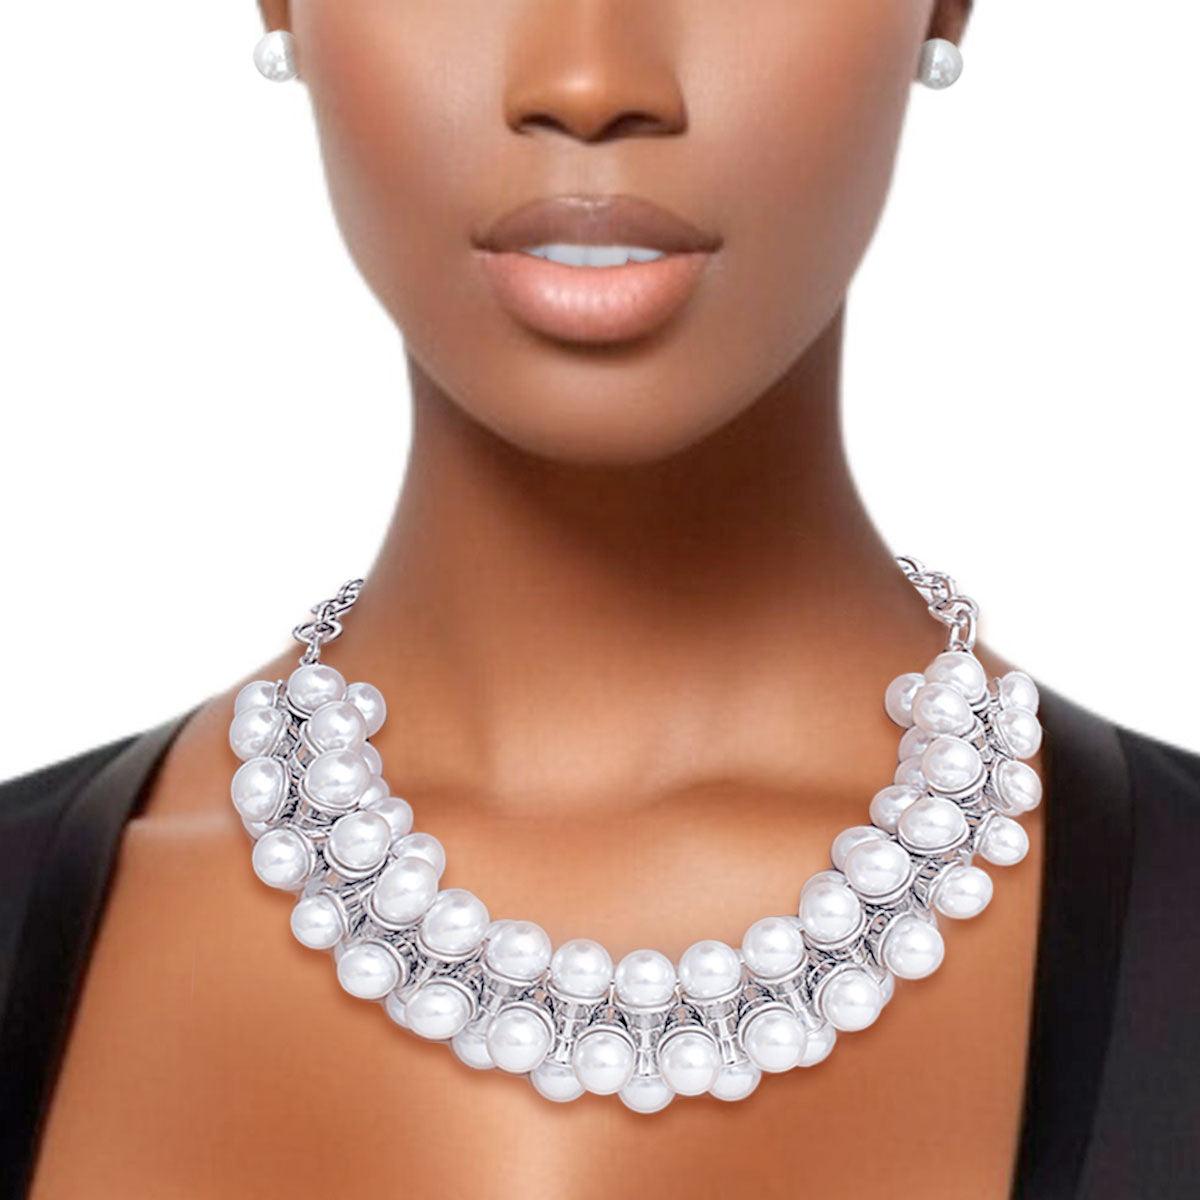 Exquisite Silver White Pearl Necklace Set: Blend of Elegance & Style